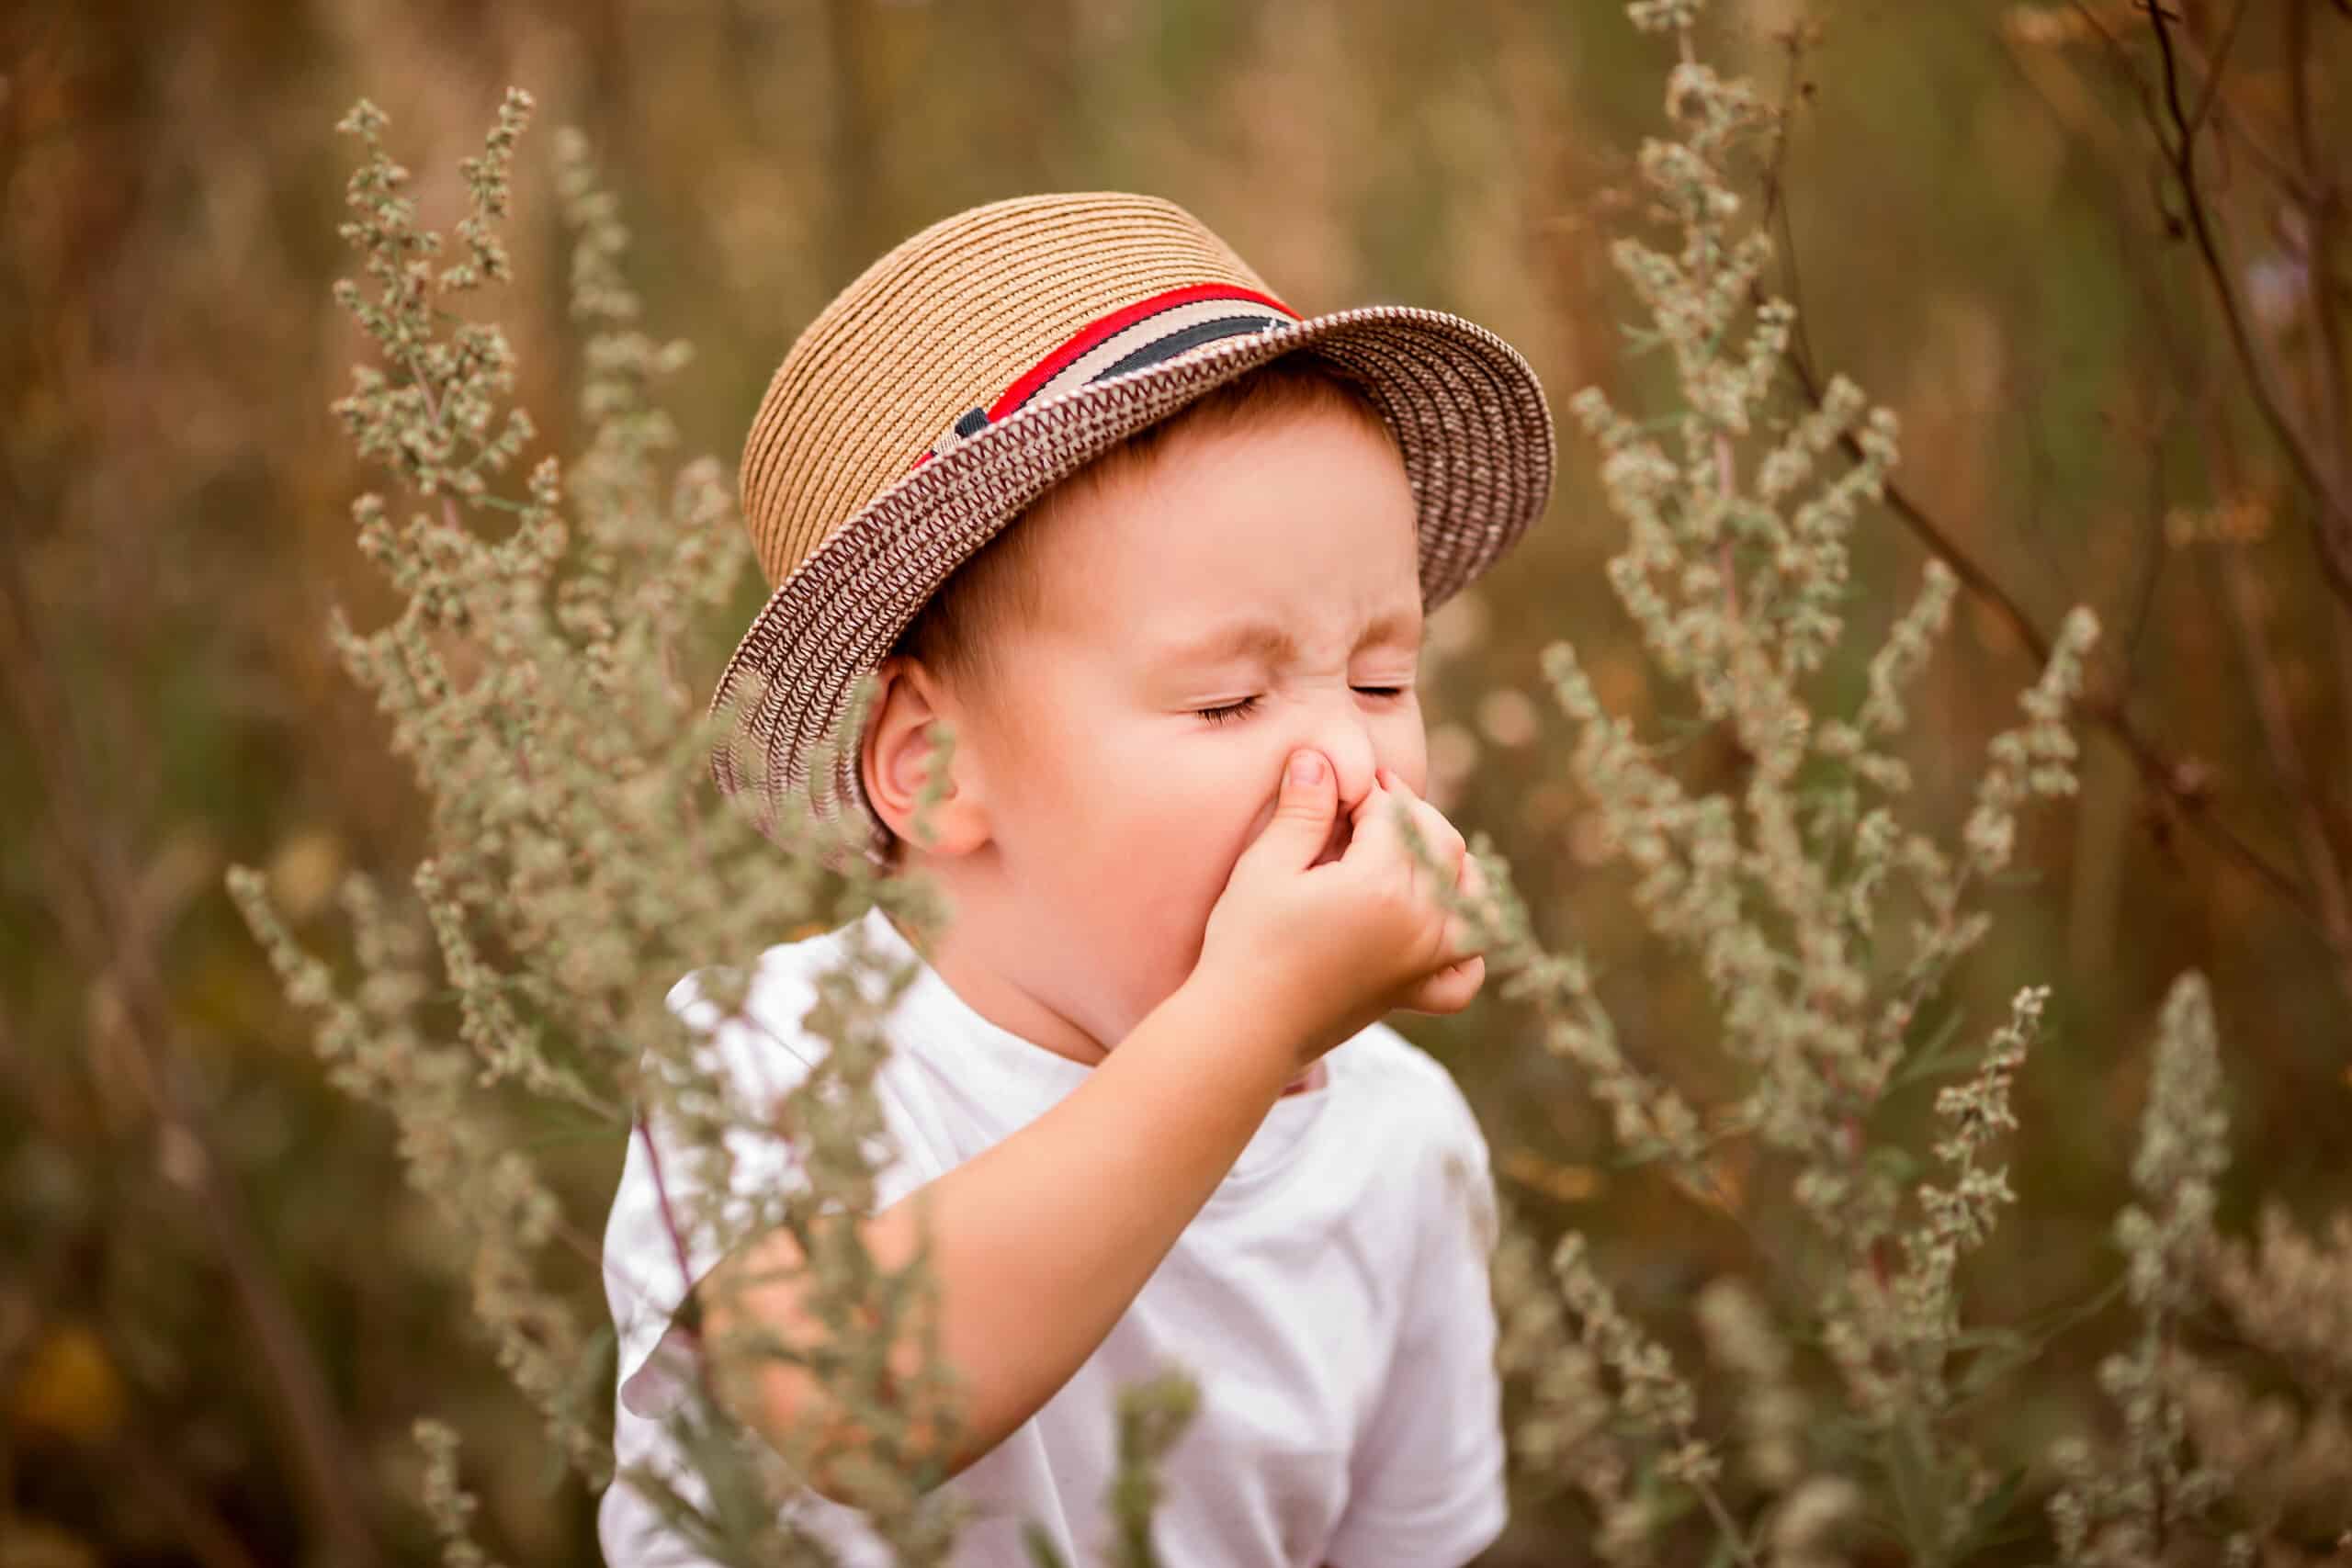 little kid with a pollen allergy about to sneeze